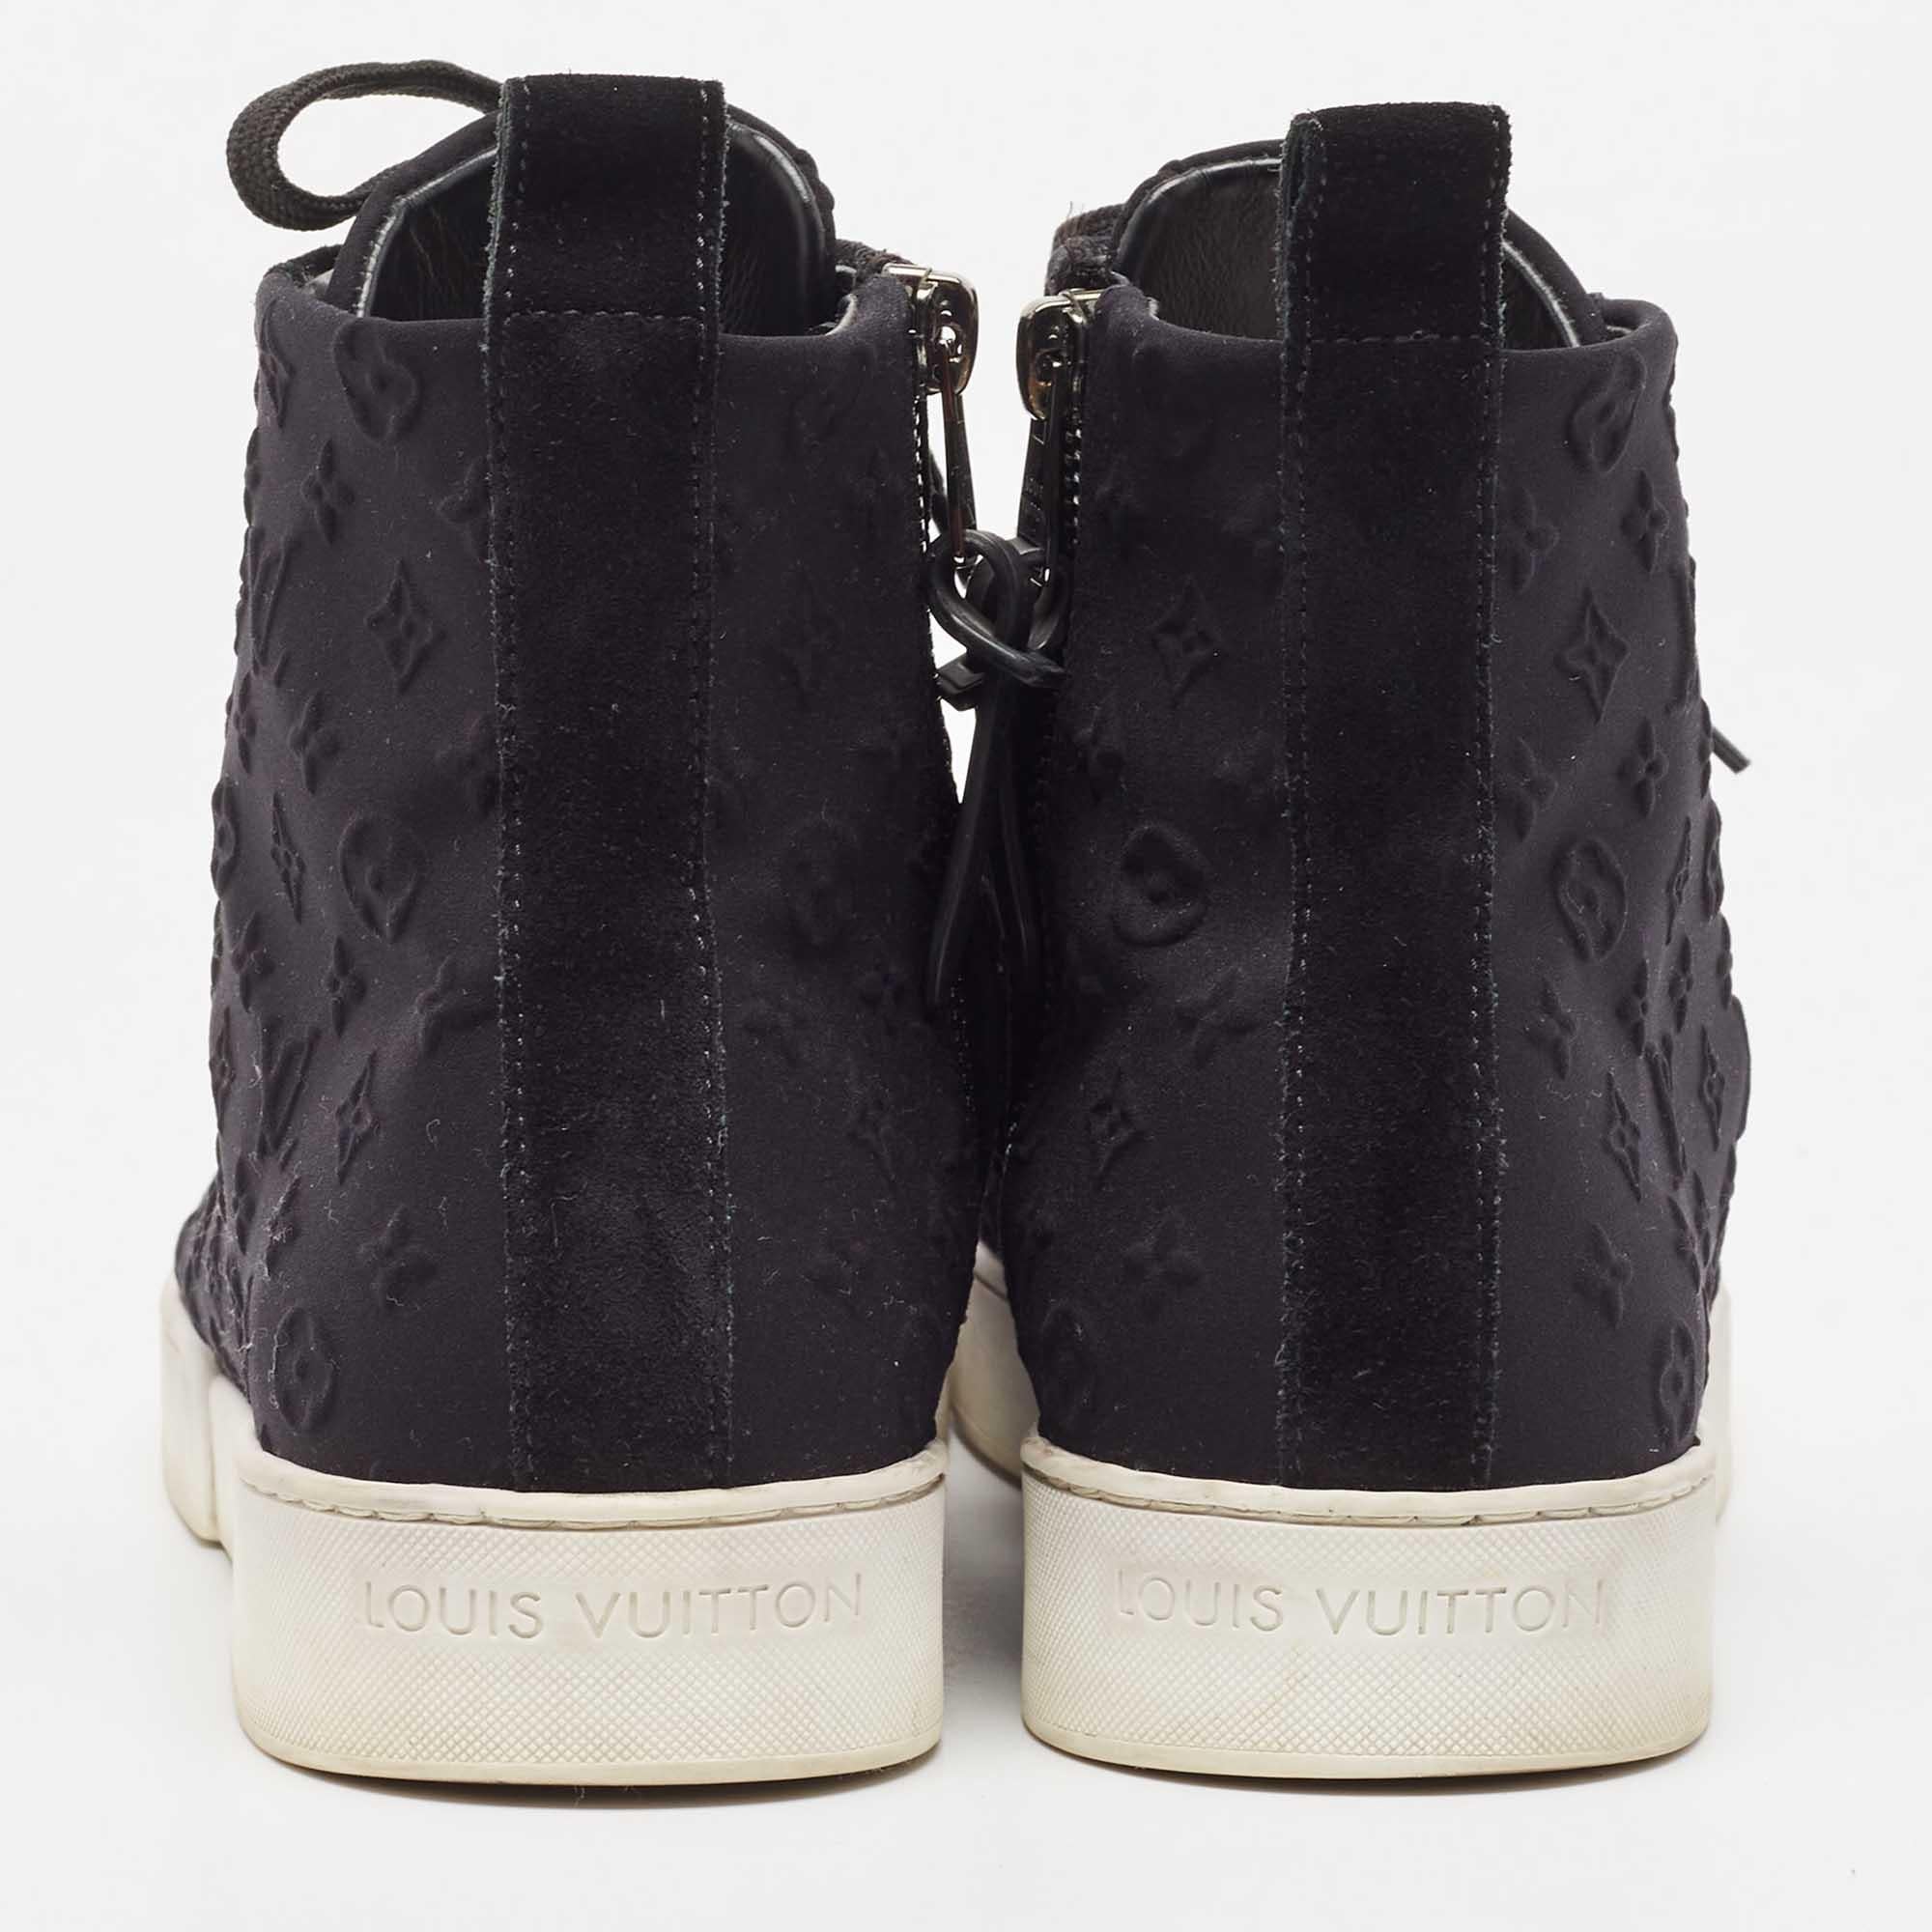 Louis Vuitton Black Monogram Neoprene and Suede High Top Sneakers Size 38 For Sale 1